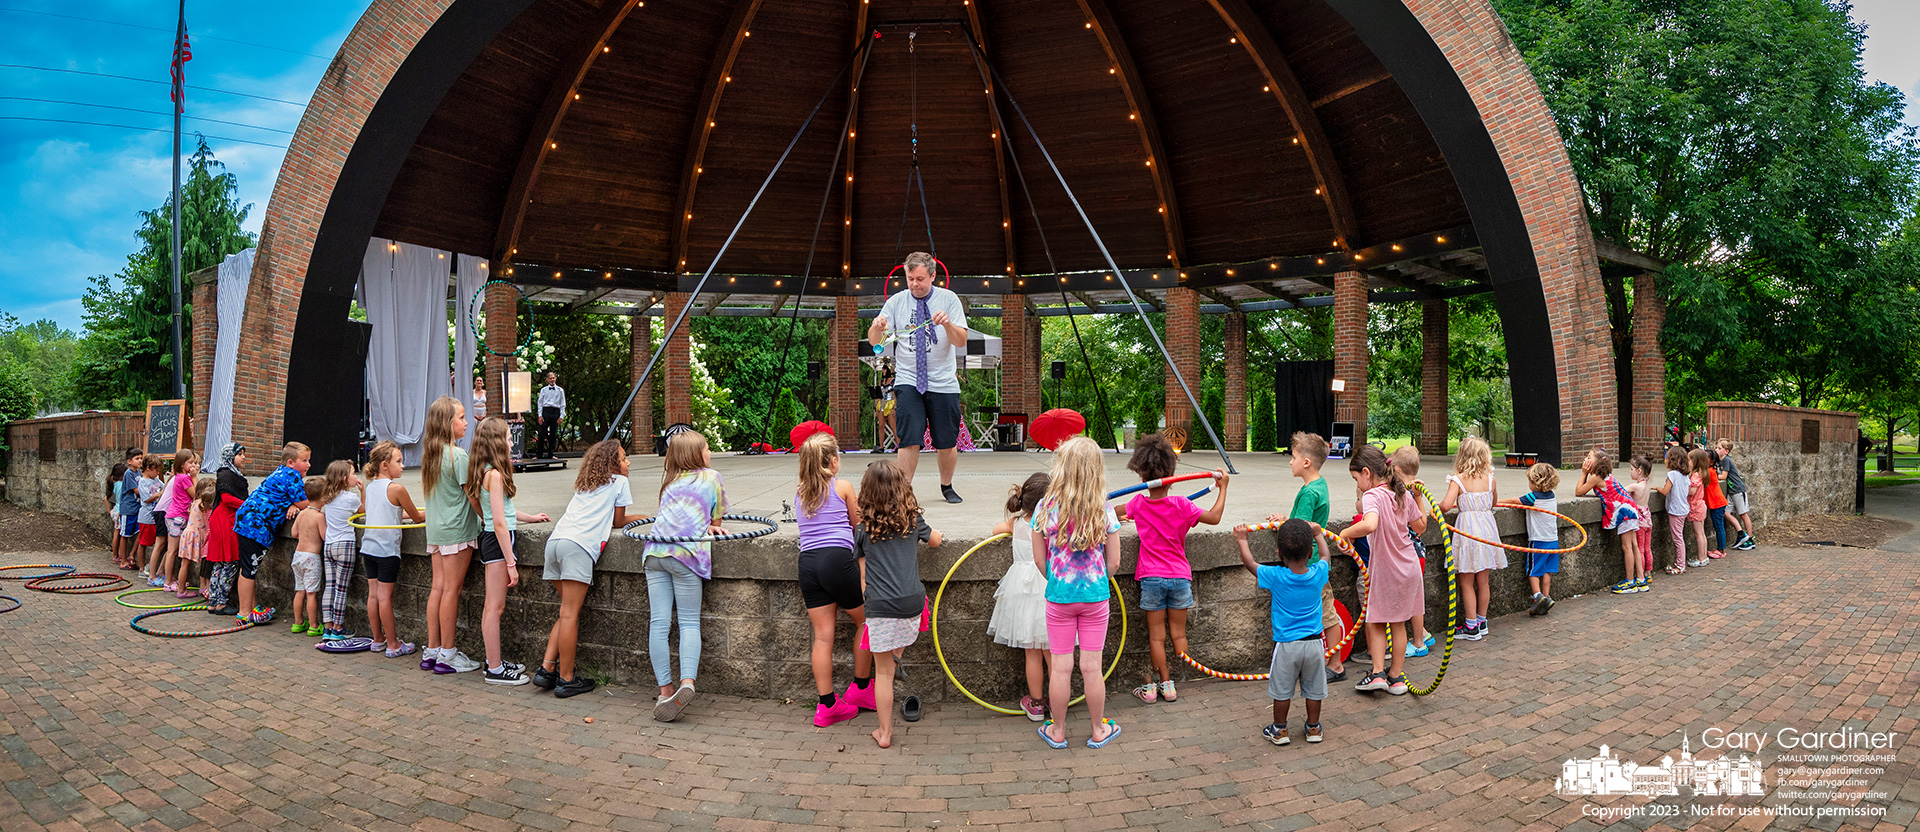 Kids line the Alum Creek Amphitheater stage as yo-yo expert Chazz Miller opens the Amazing Circus Show Saturday night. My Final Photo for August 5, 2023.